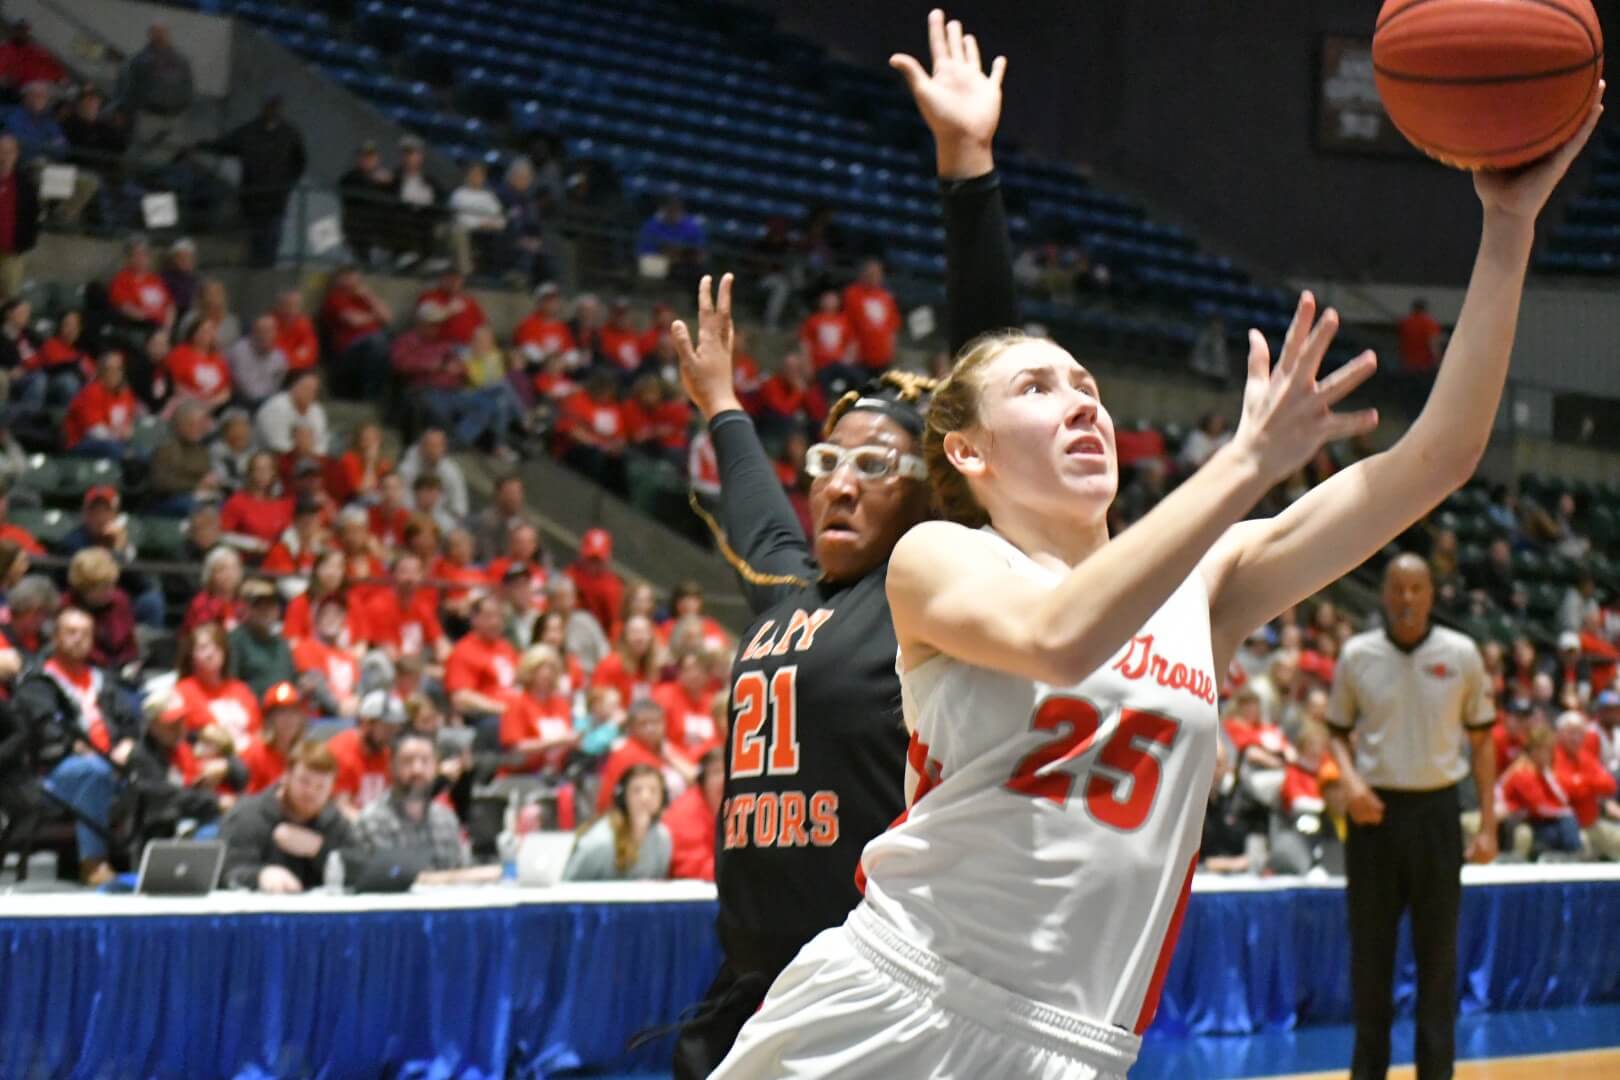 Pine Grove advances to play for third straight state championship